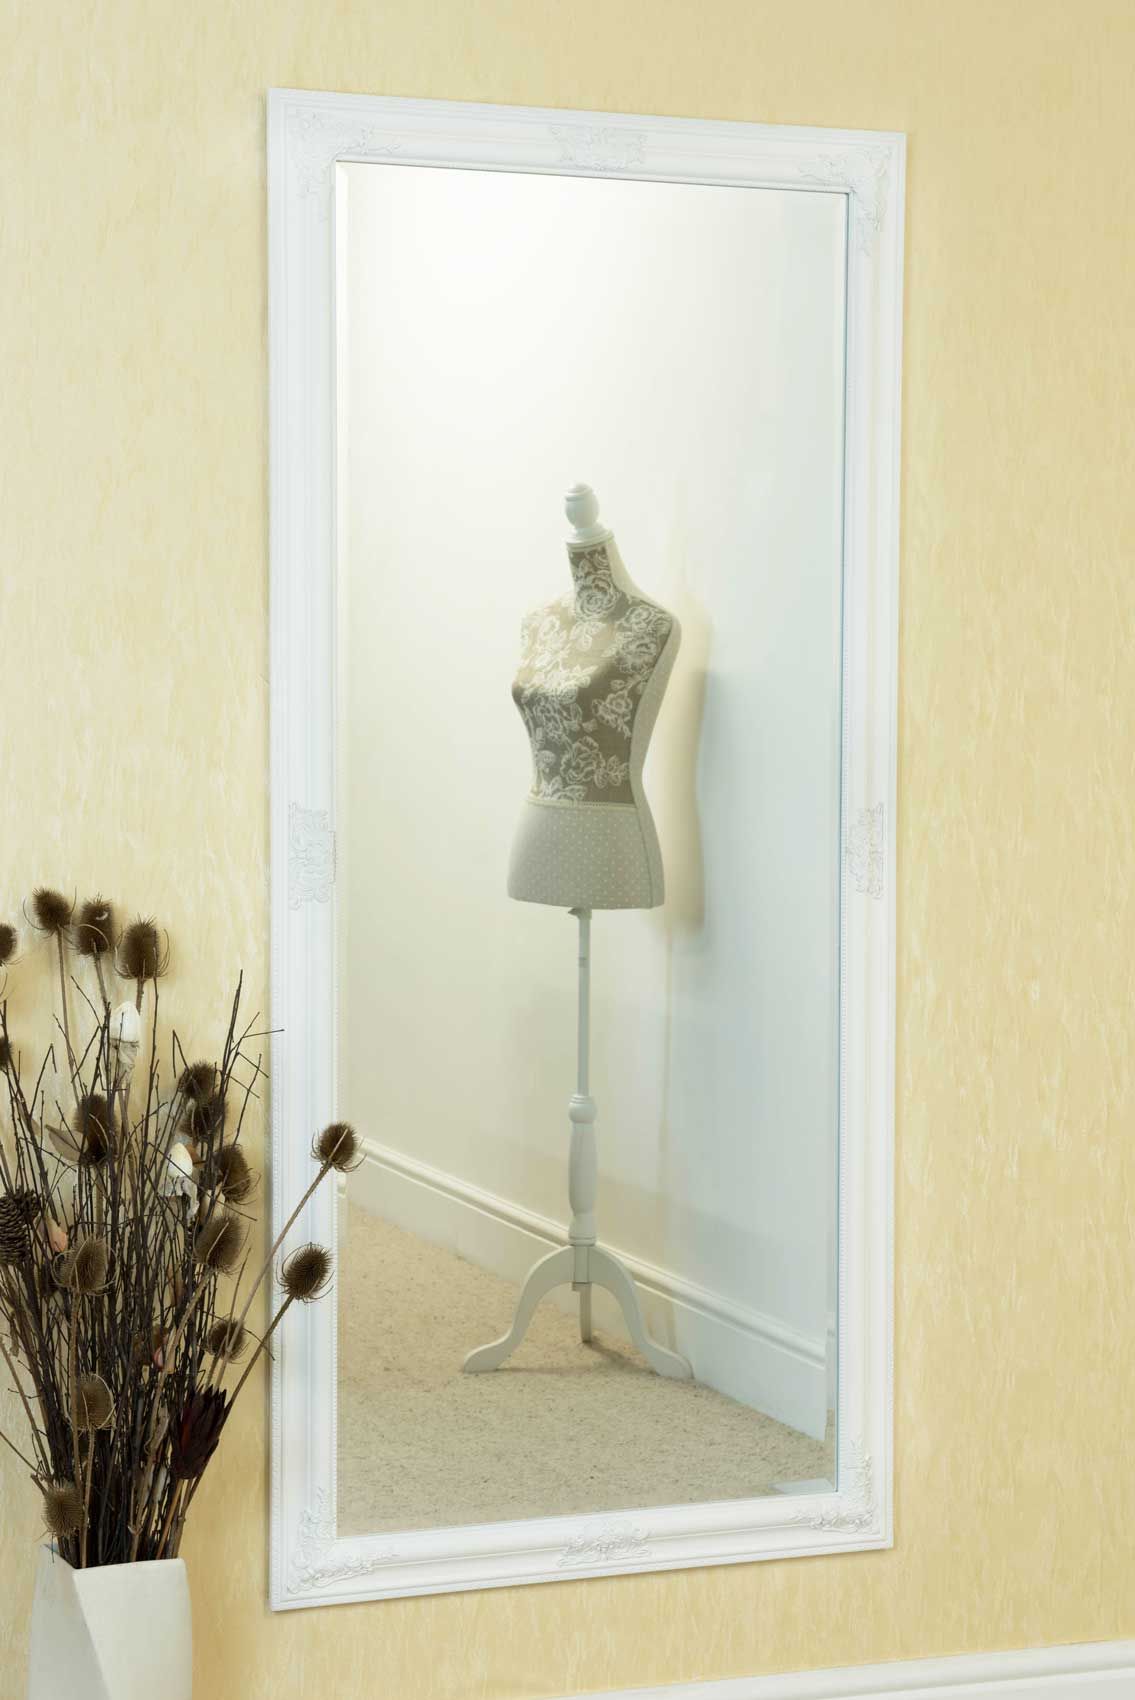 Large White Full Length Wall Mounted Mirror 5ft3 X 2ft5 160cm X 73cm | Ebay For White Wall Mirrors (View 14 of 15)